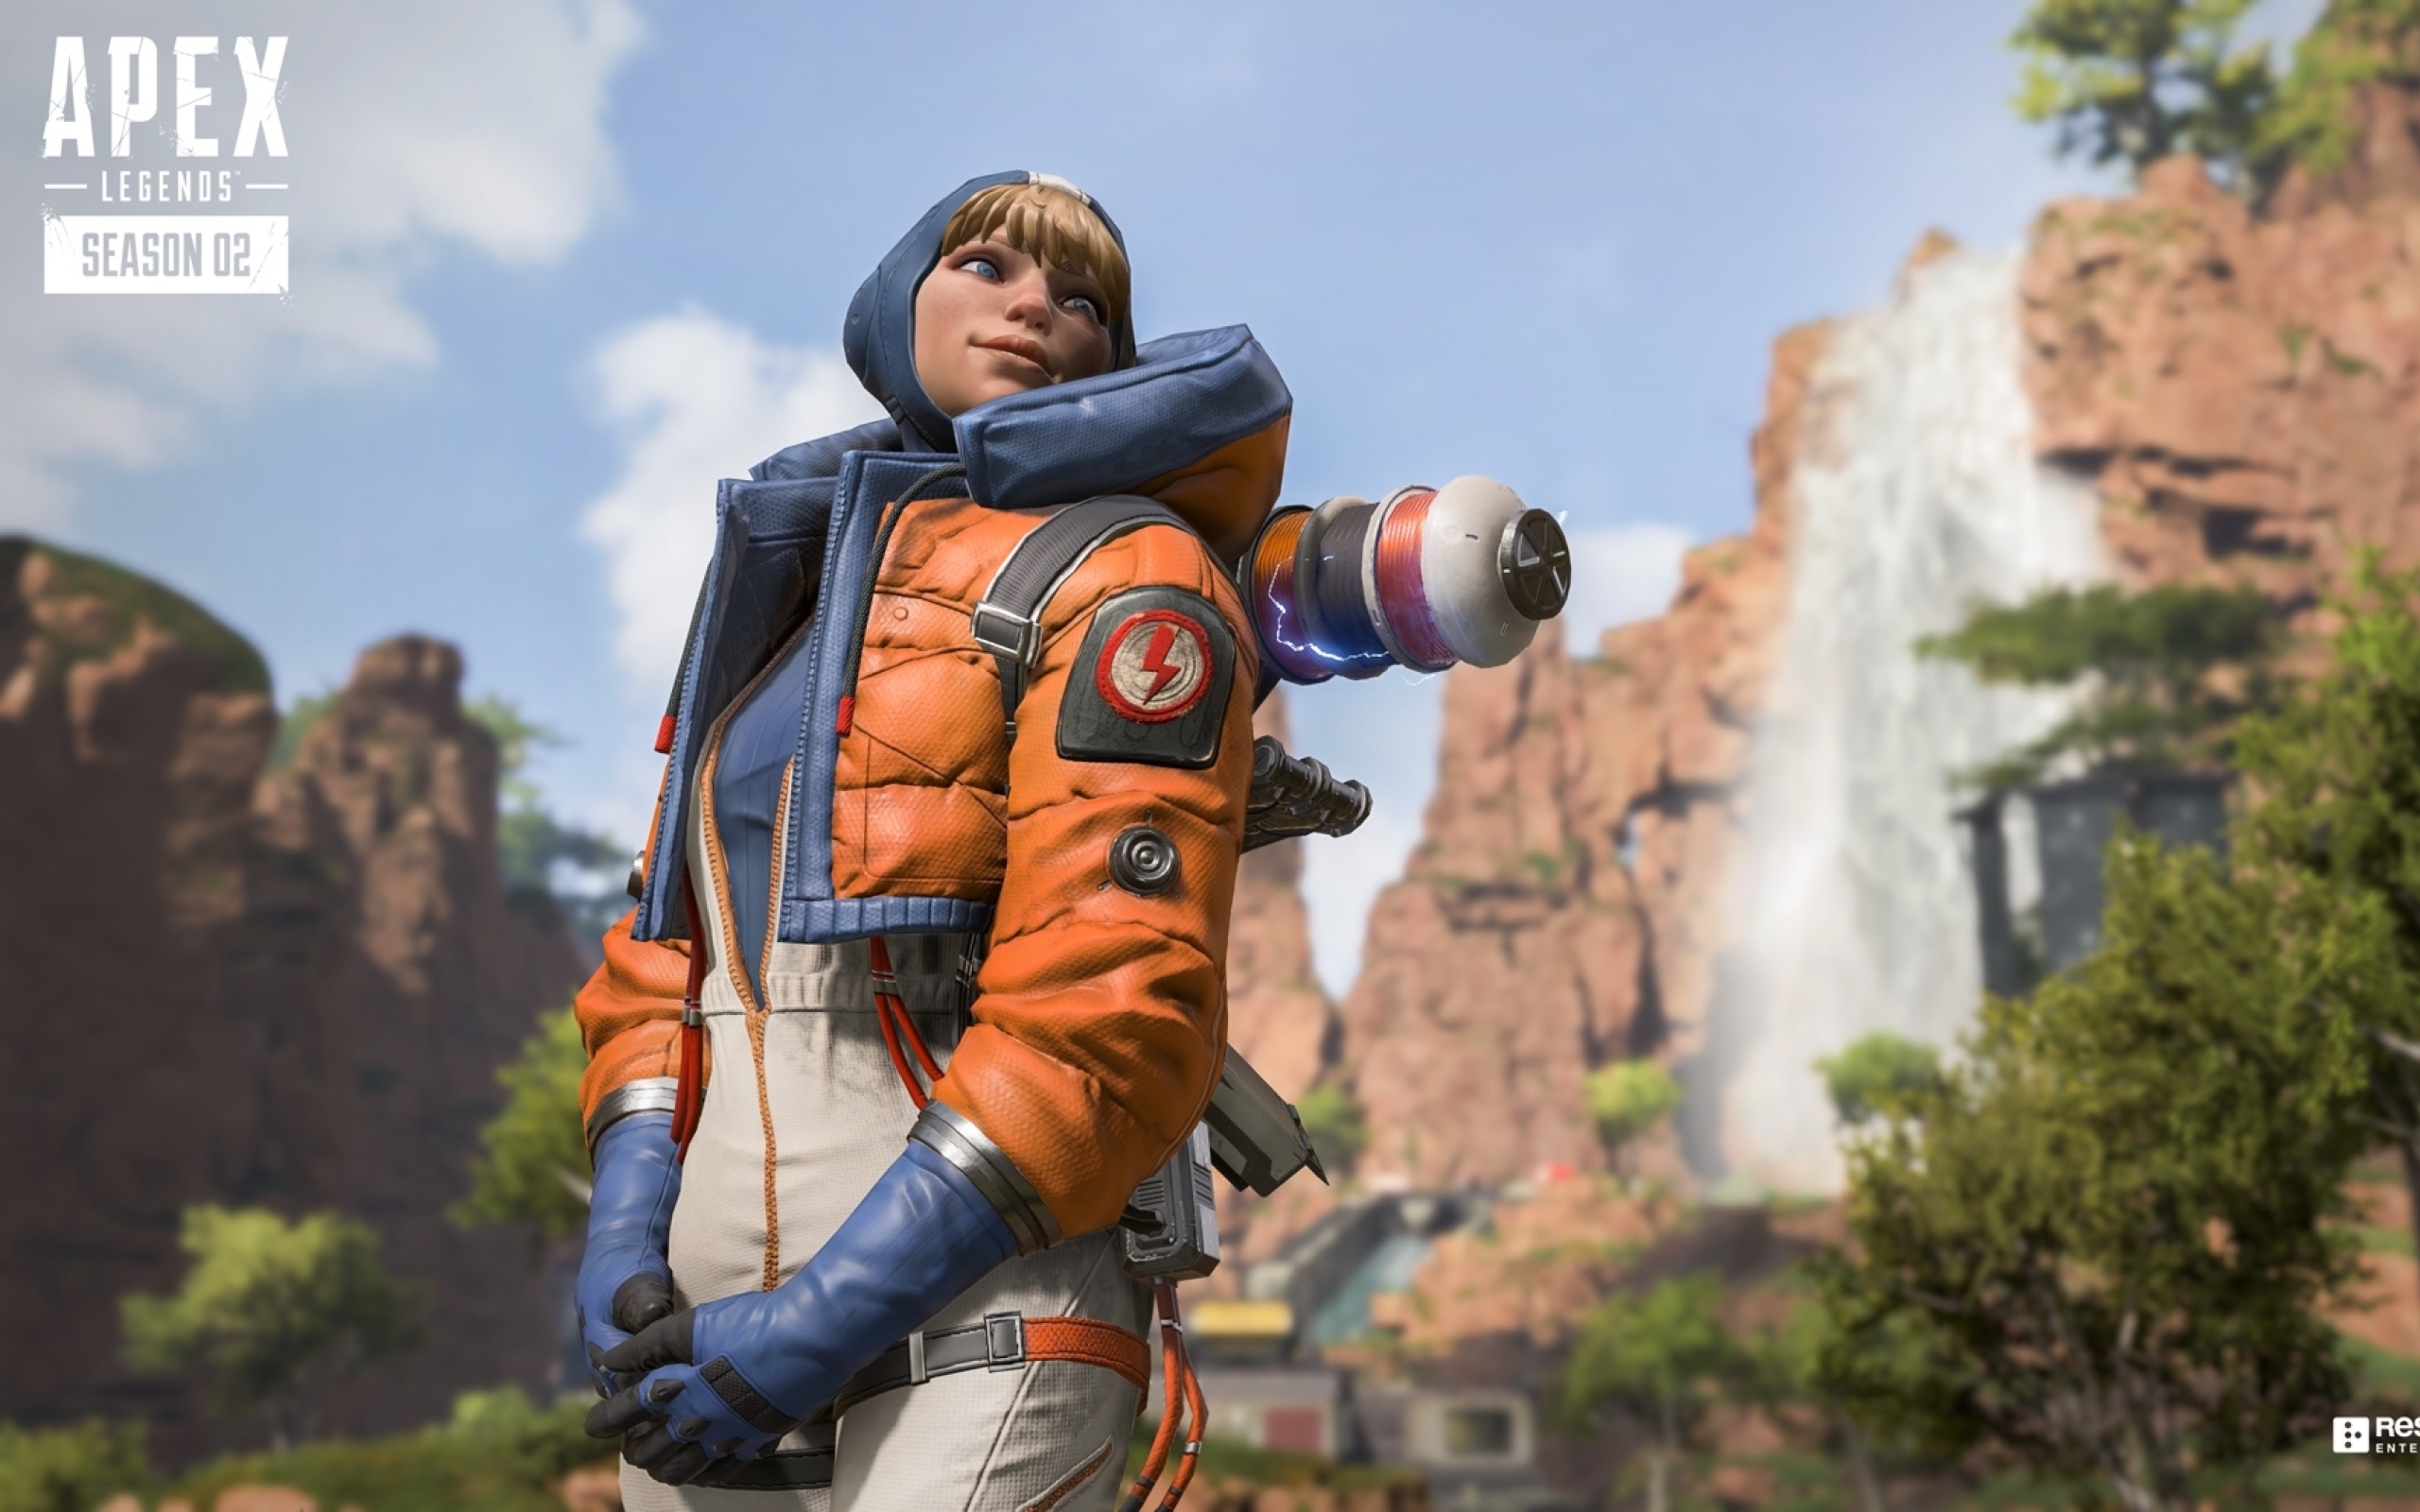 2560x1600 Apex Legends Mobile 2020 Game 2560x1600 Resolution Wallpaper Hd Games 4k Wallpapers Images Photos And Background